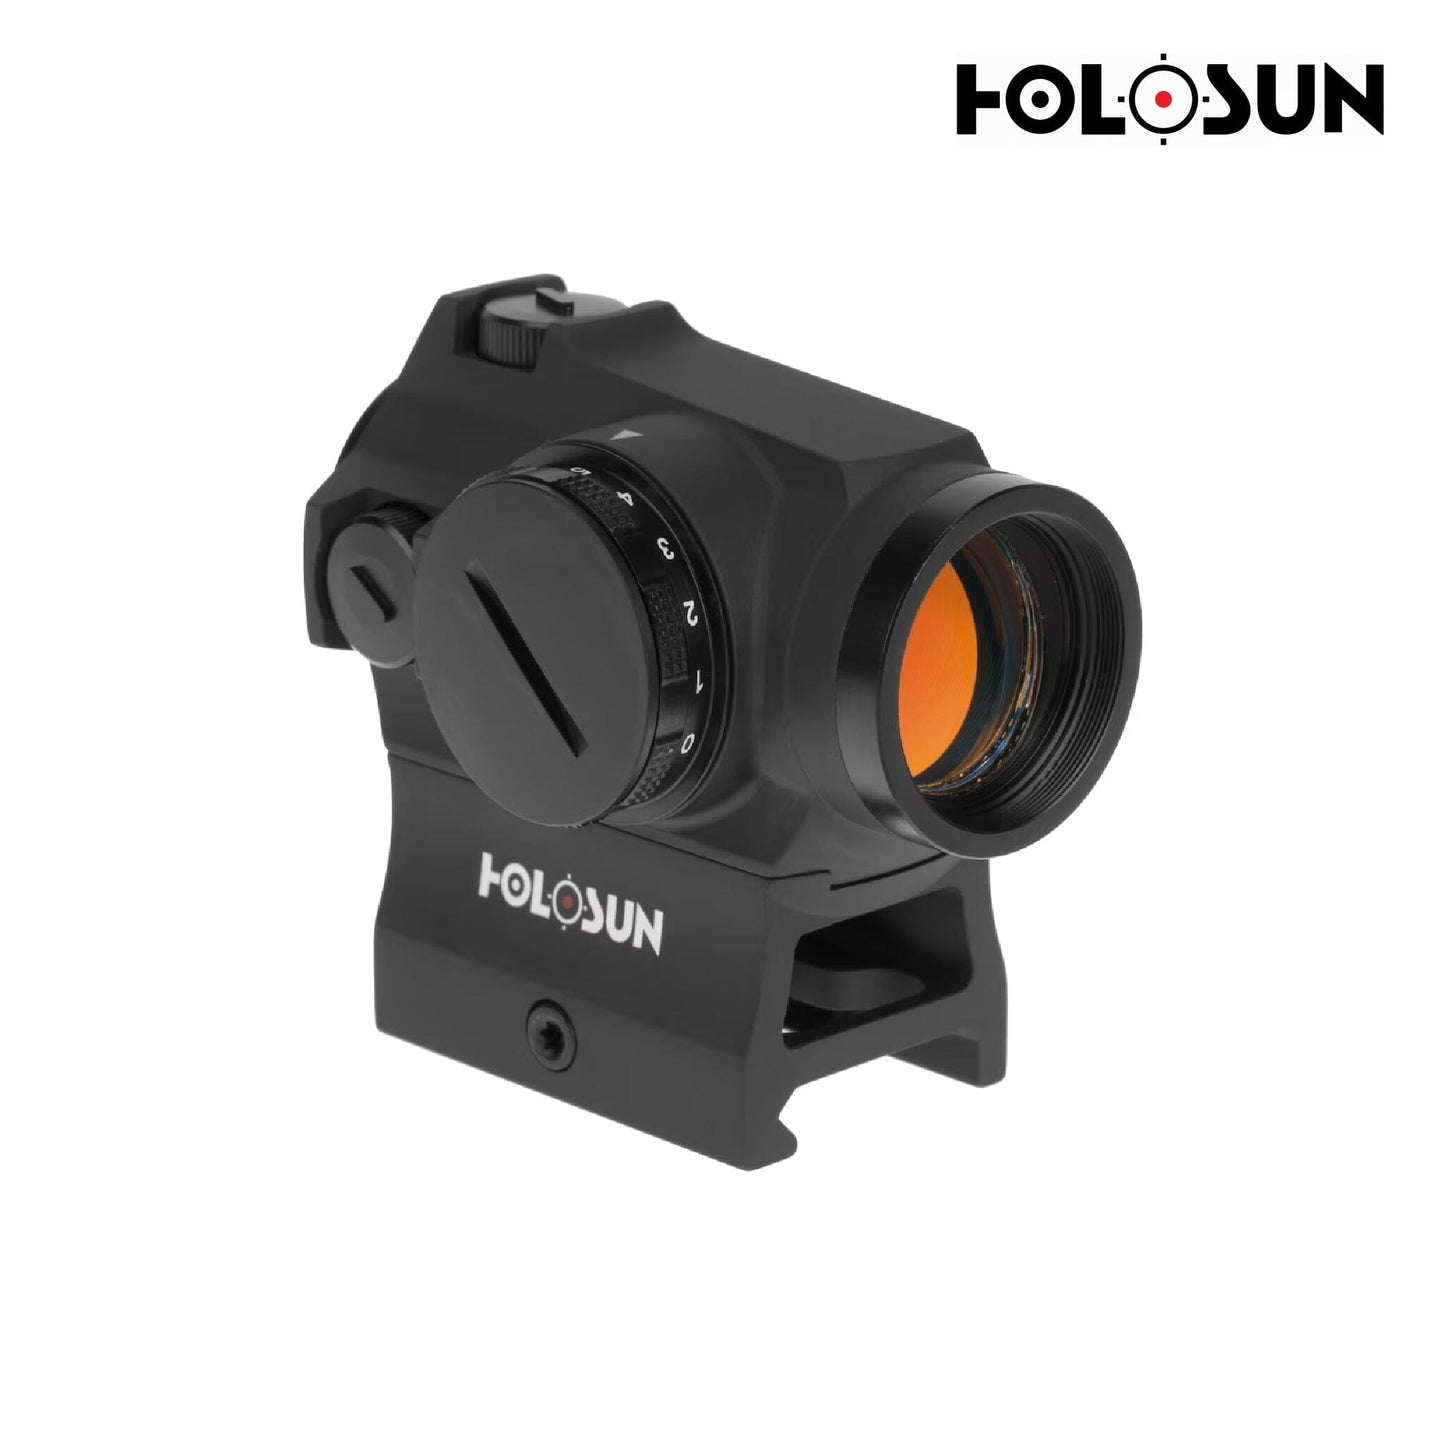 Holosun HS503R Micro Rheo Stat Dial Red Dot Sight Selectable Reticle Red Dot Sight Holosun Technologies 